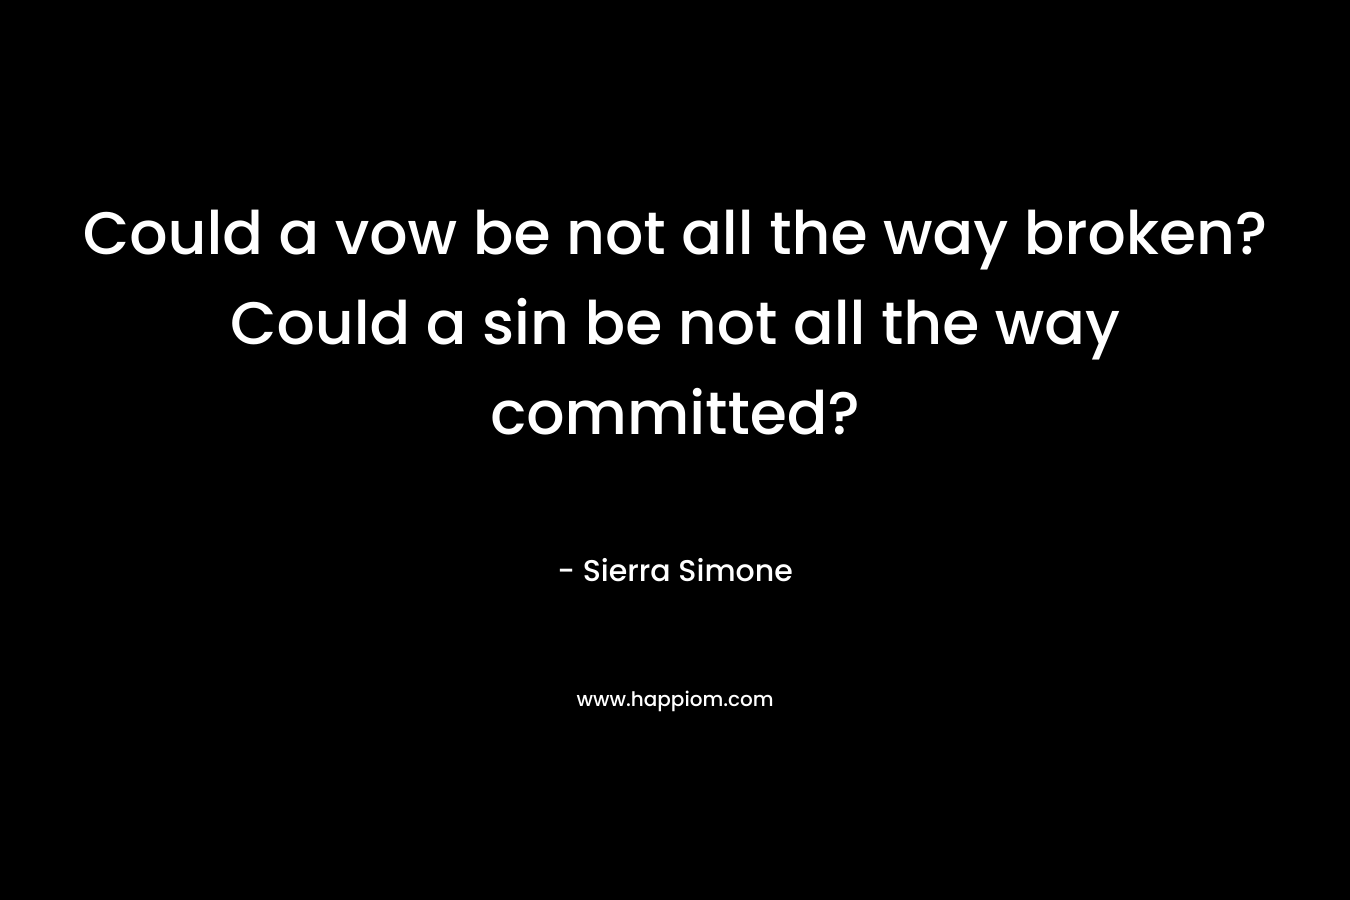 Could a vow be not all the way broken? Could a sin be not all the way committed? – Sierra Simone